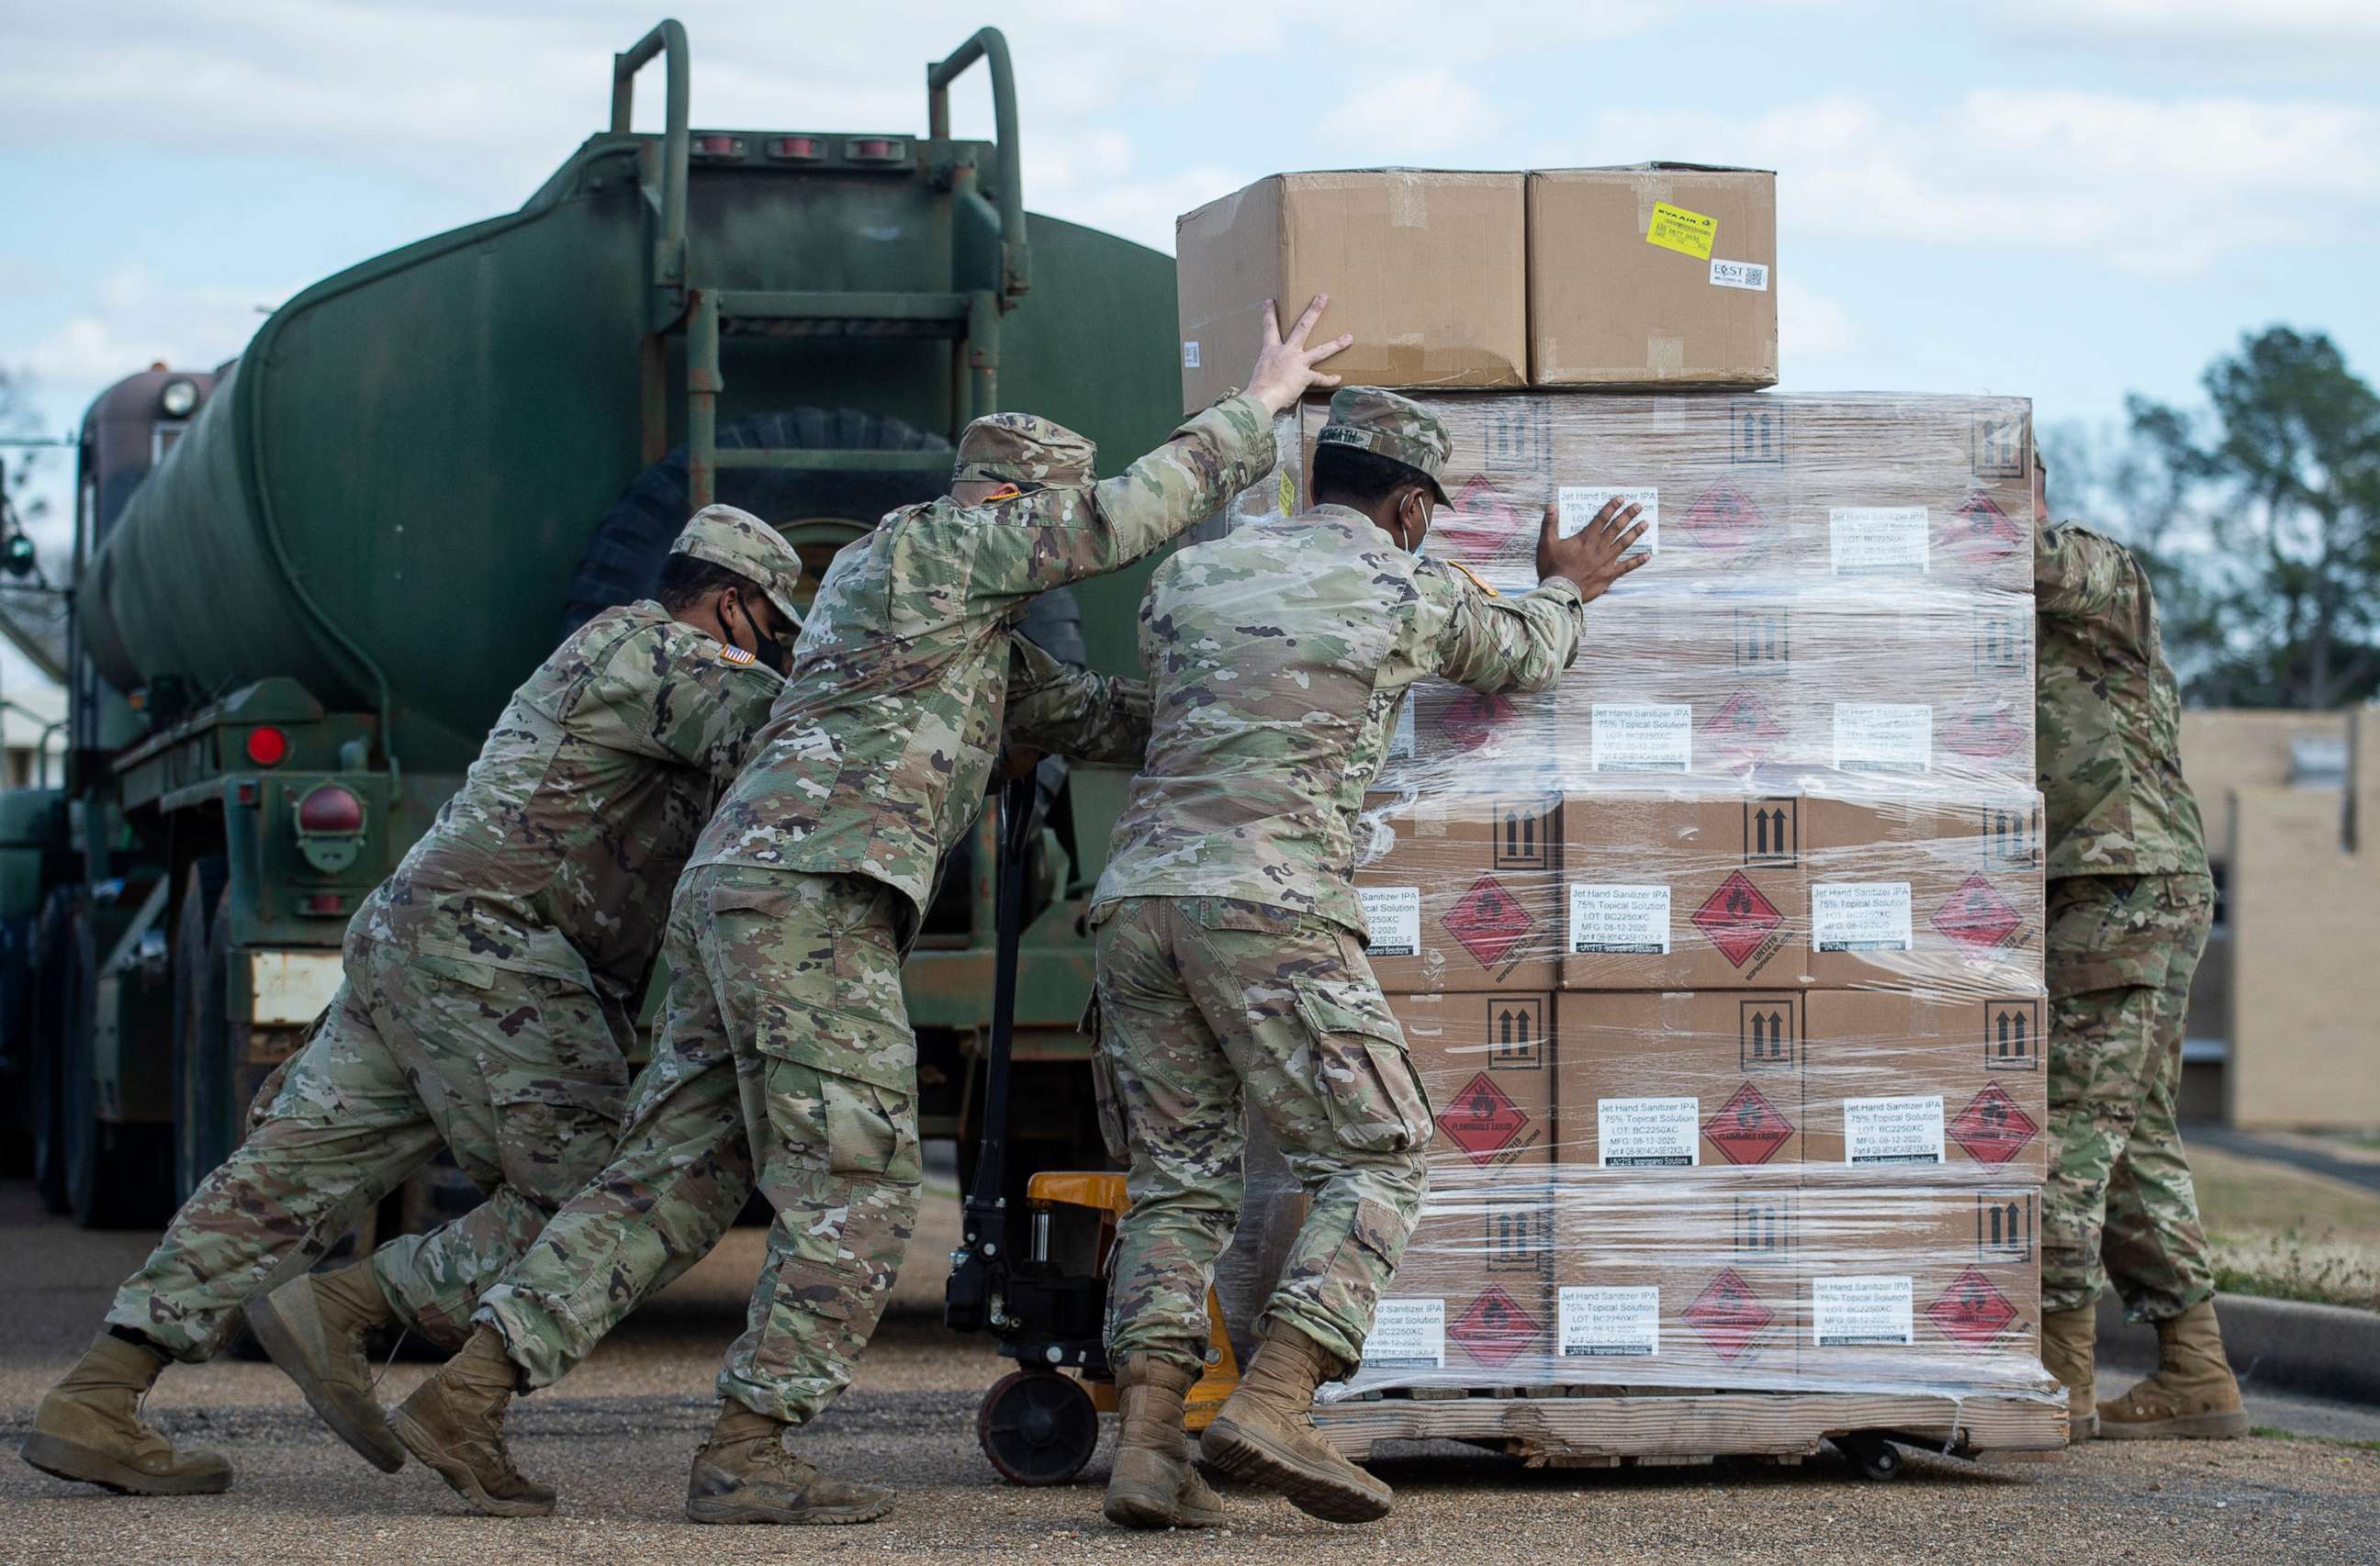 PHOTO: Mississippi National Guard soldiers put hand sanitizer and masks in place for residents in Jackson, Miss., Feb. 24, 2021. The soldiers also distributed non-potable water to residents due to a water outage after last week's winter storms.